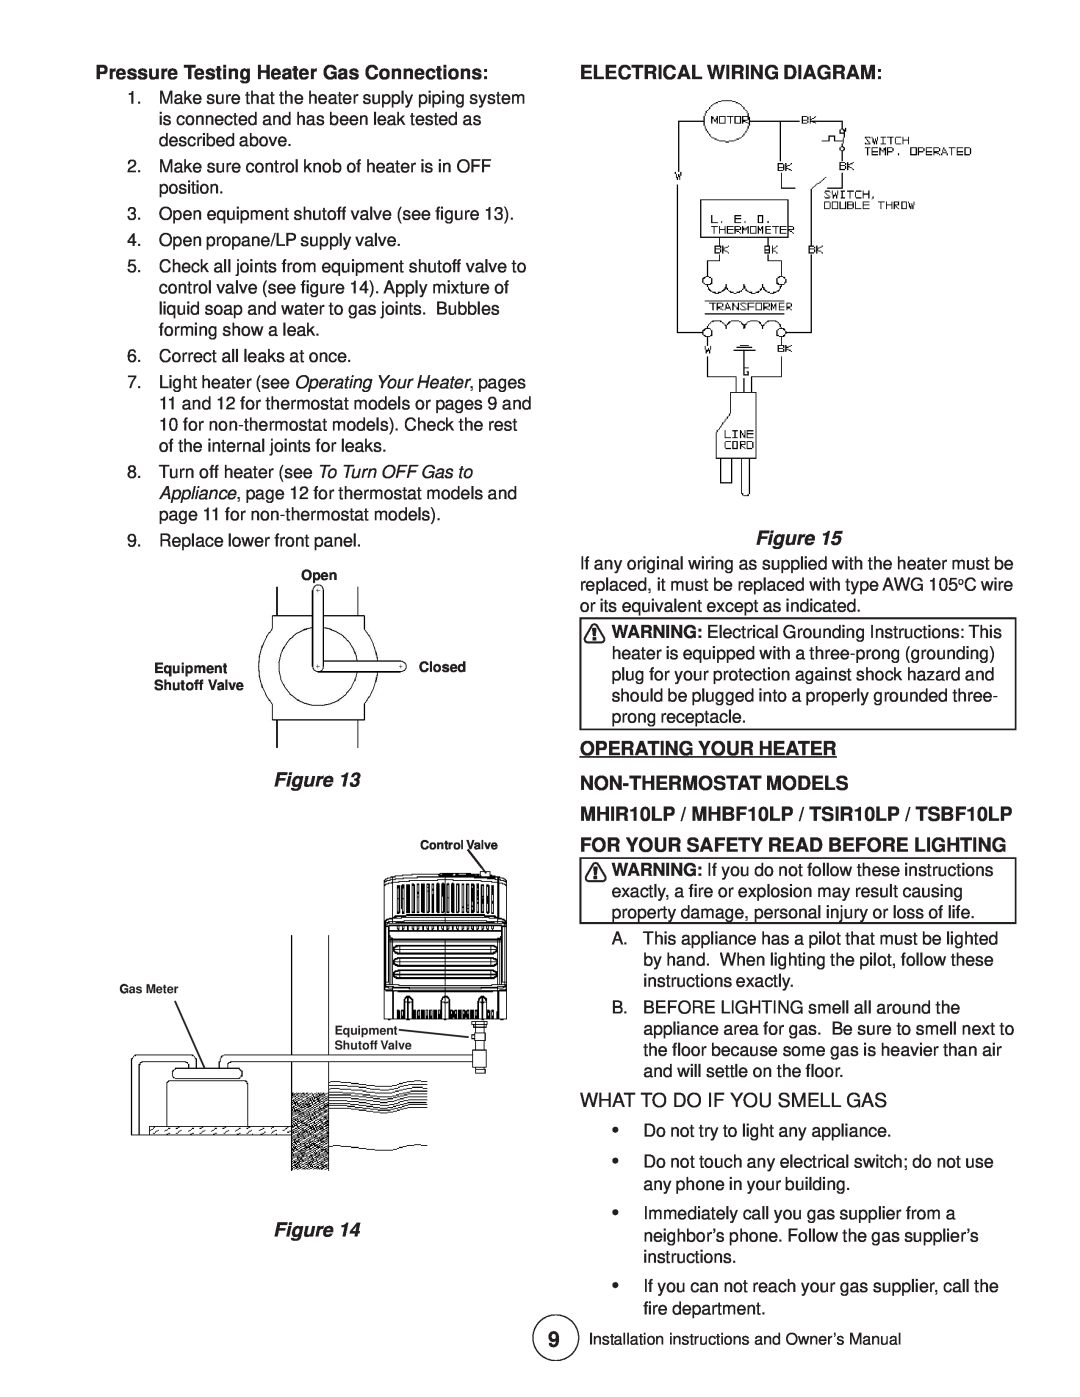 Enerco MHBF20LPT Pressure Testing Heater Gas Connections, Electrical Wiring Diagram, For Your Safety Read Before Lighting 